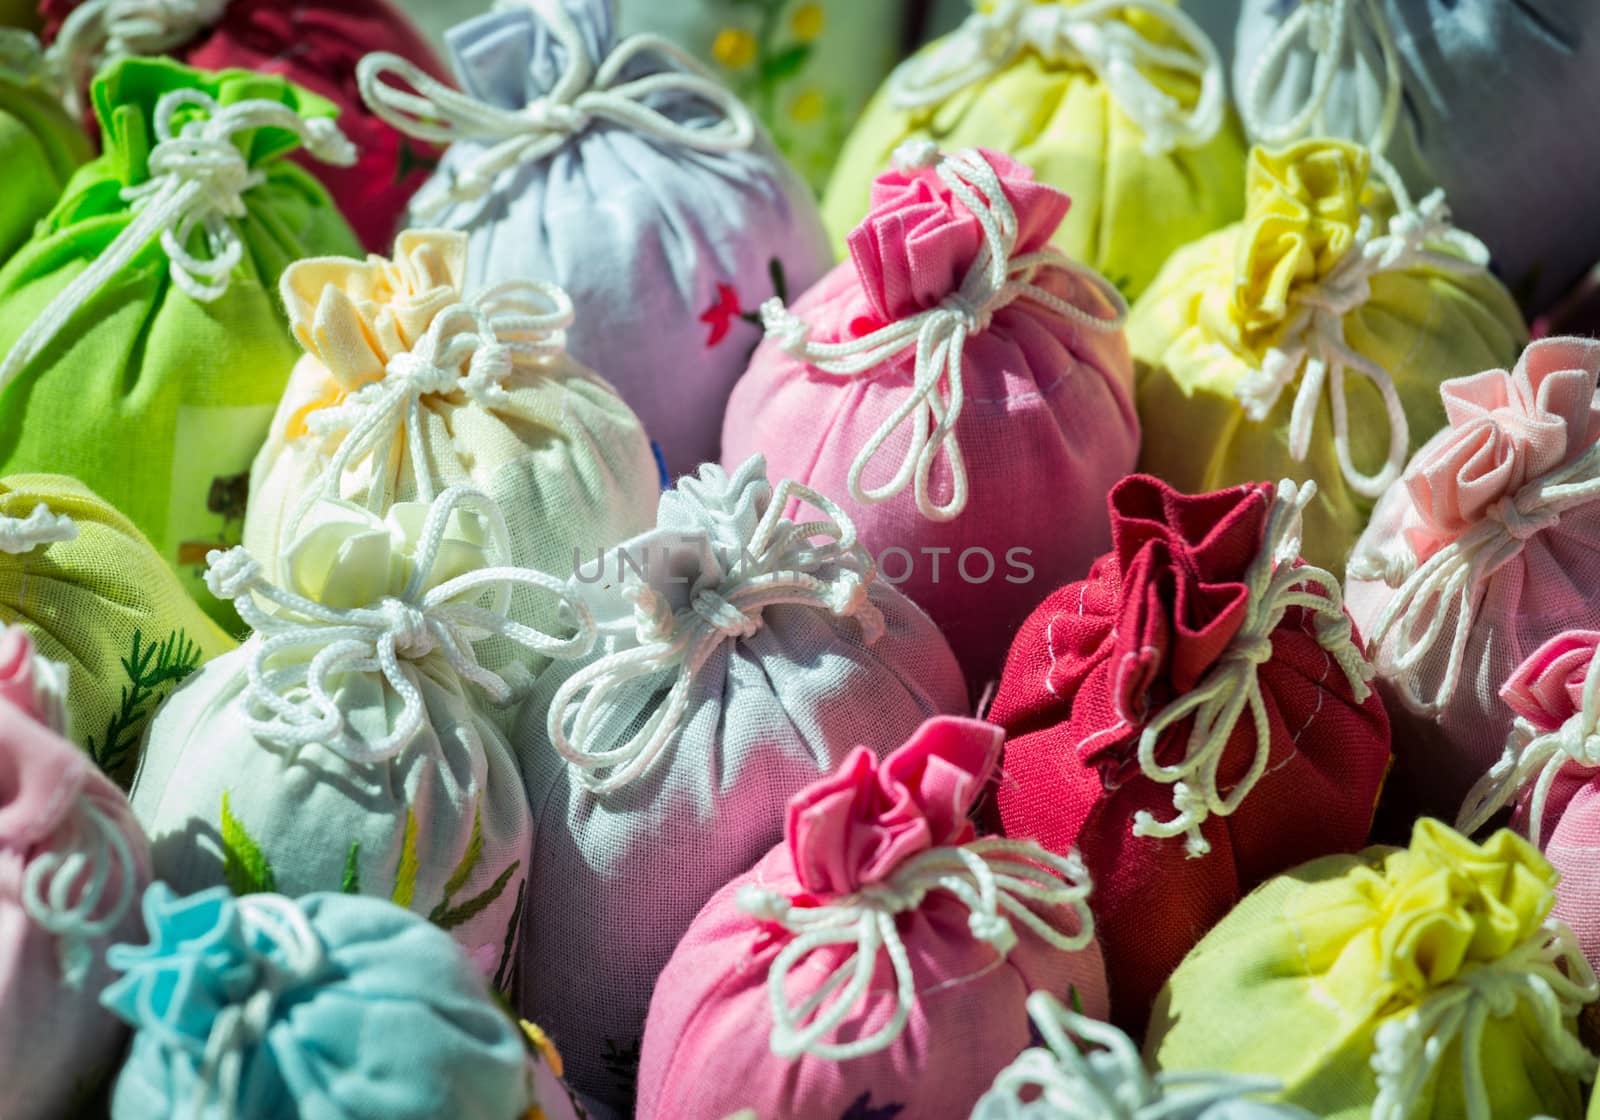 Multi-colored bags of lavender in embroidered gift cloth sacks tied with string